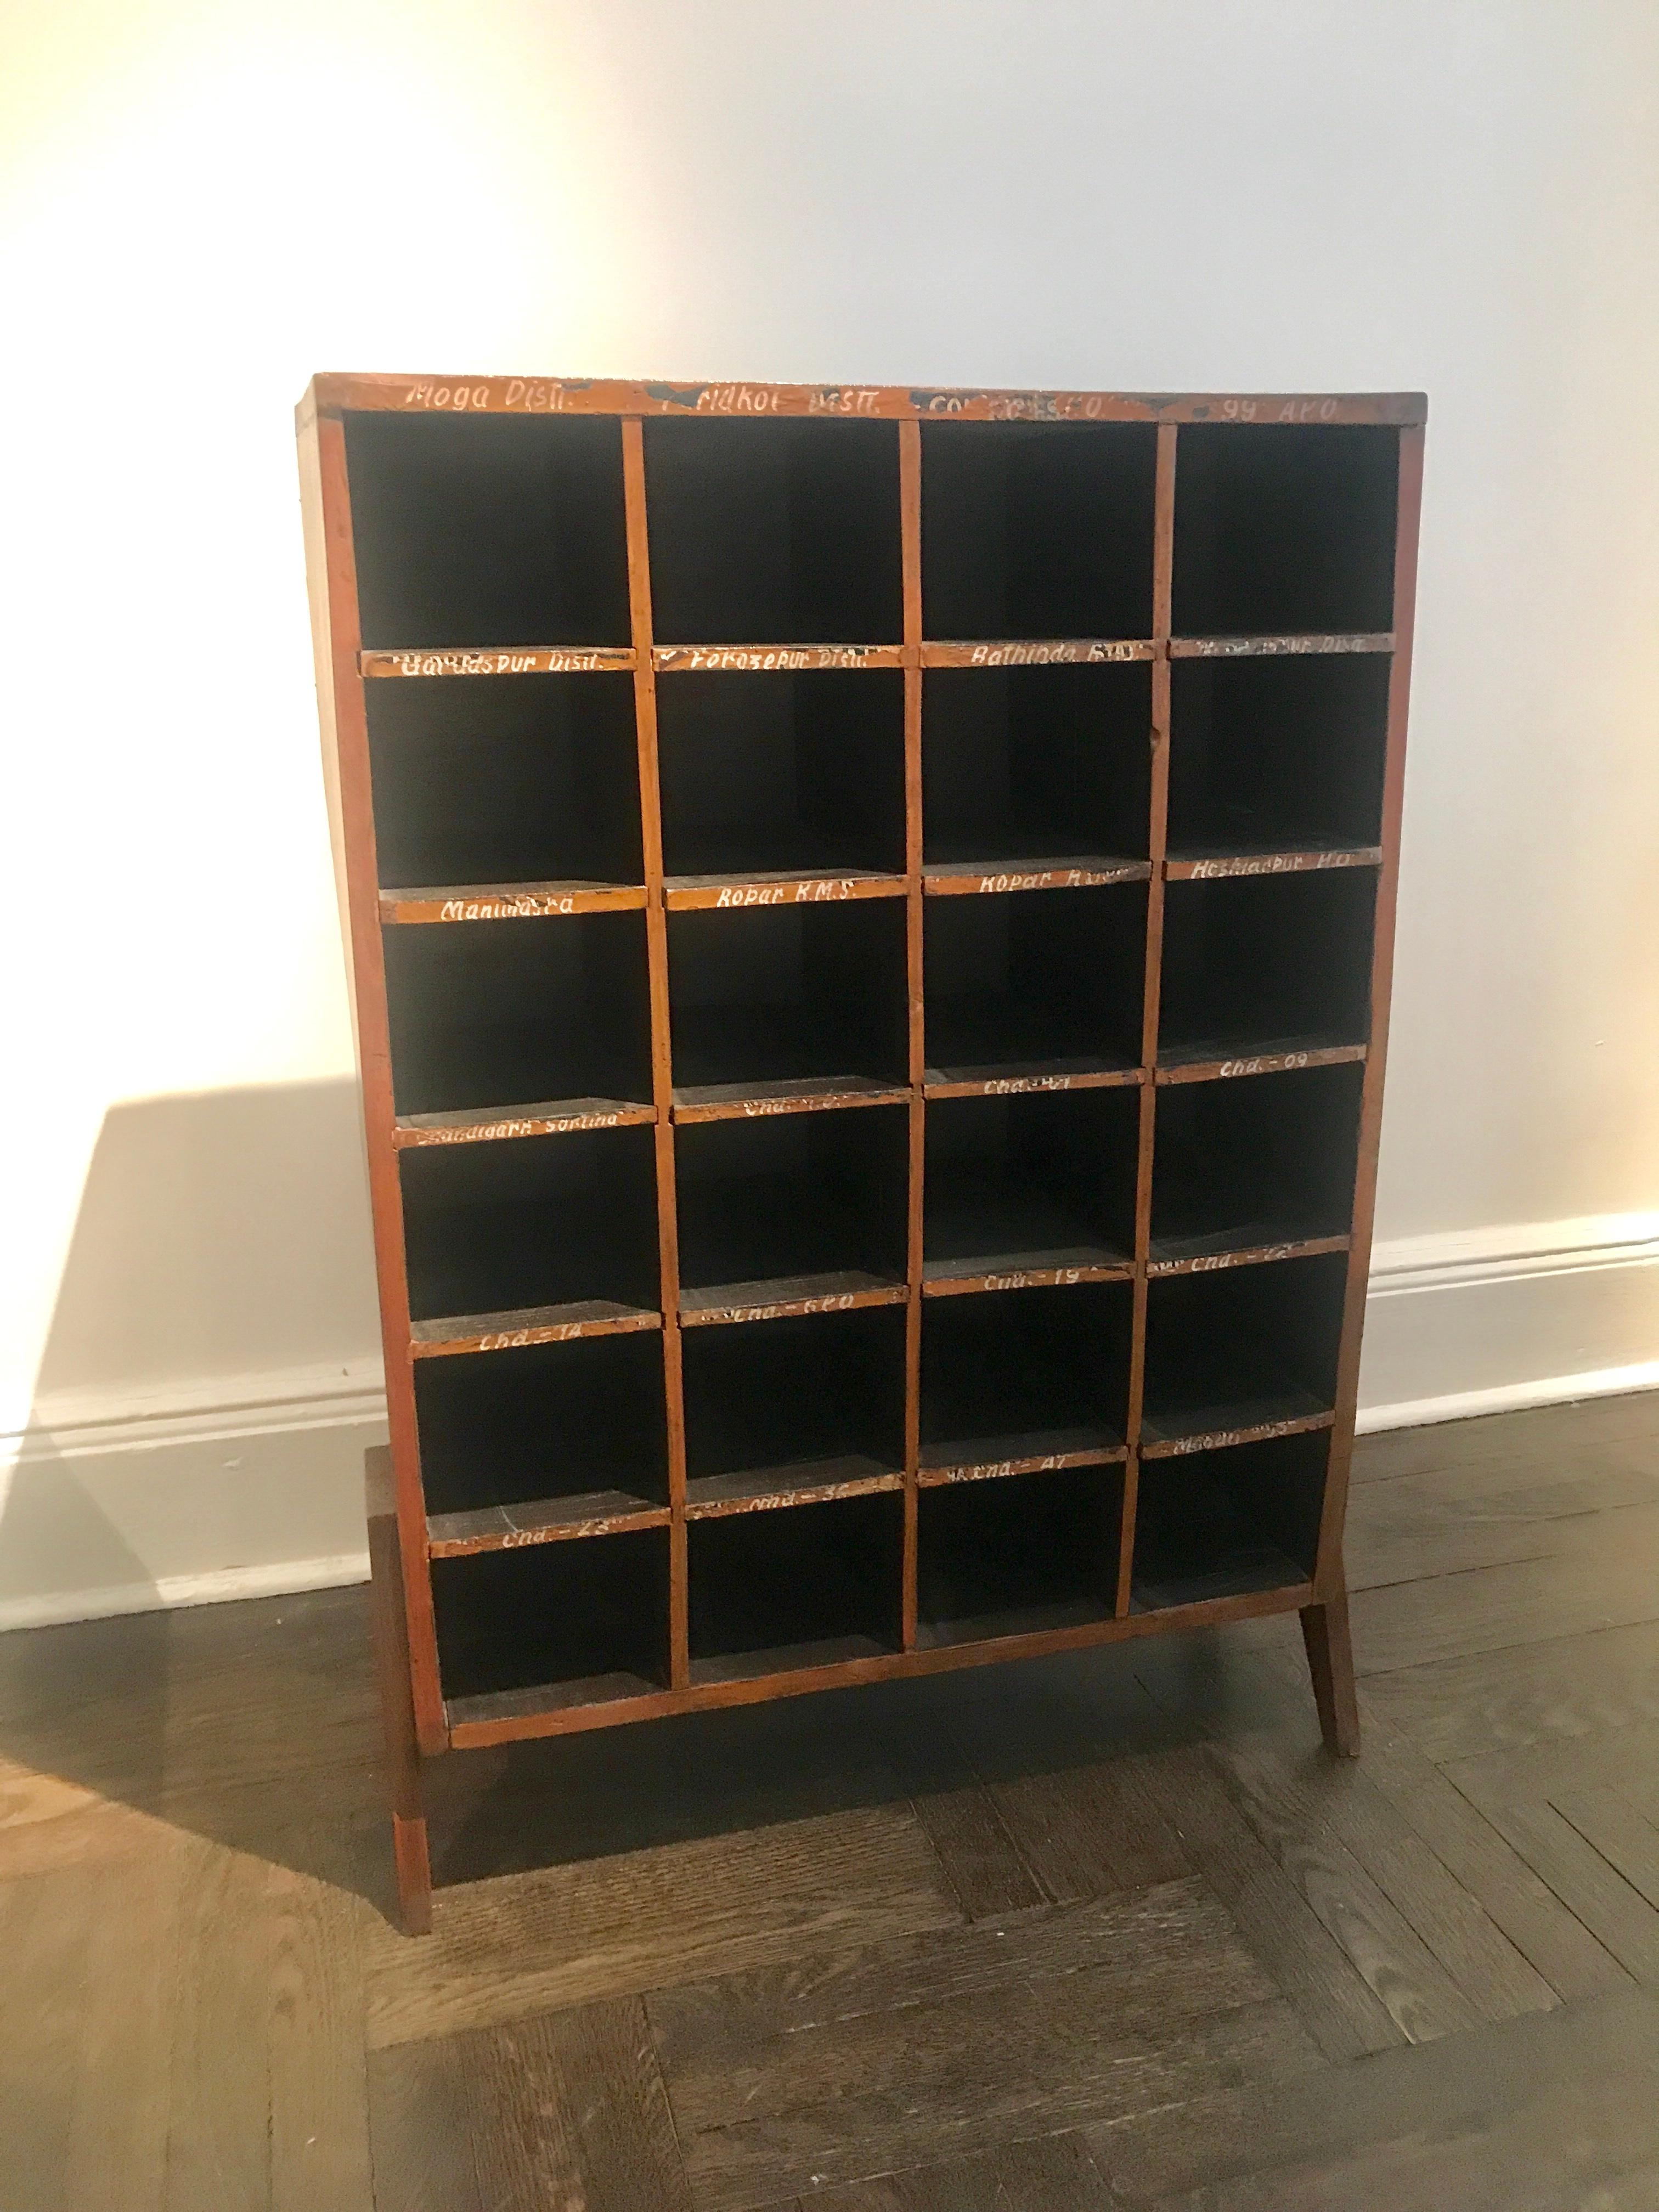 Pierre Jeanneret, circa 1960 
Post Office Cabinet in East Indian Rosewood listing the districts of Punjab, India for mail sorting. 
Provenance: Chandigarh, India.